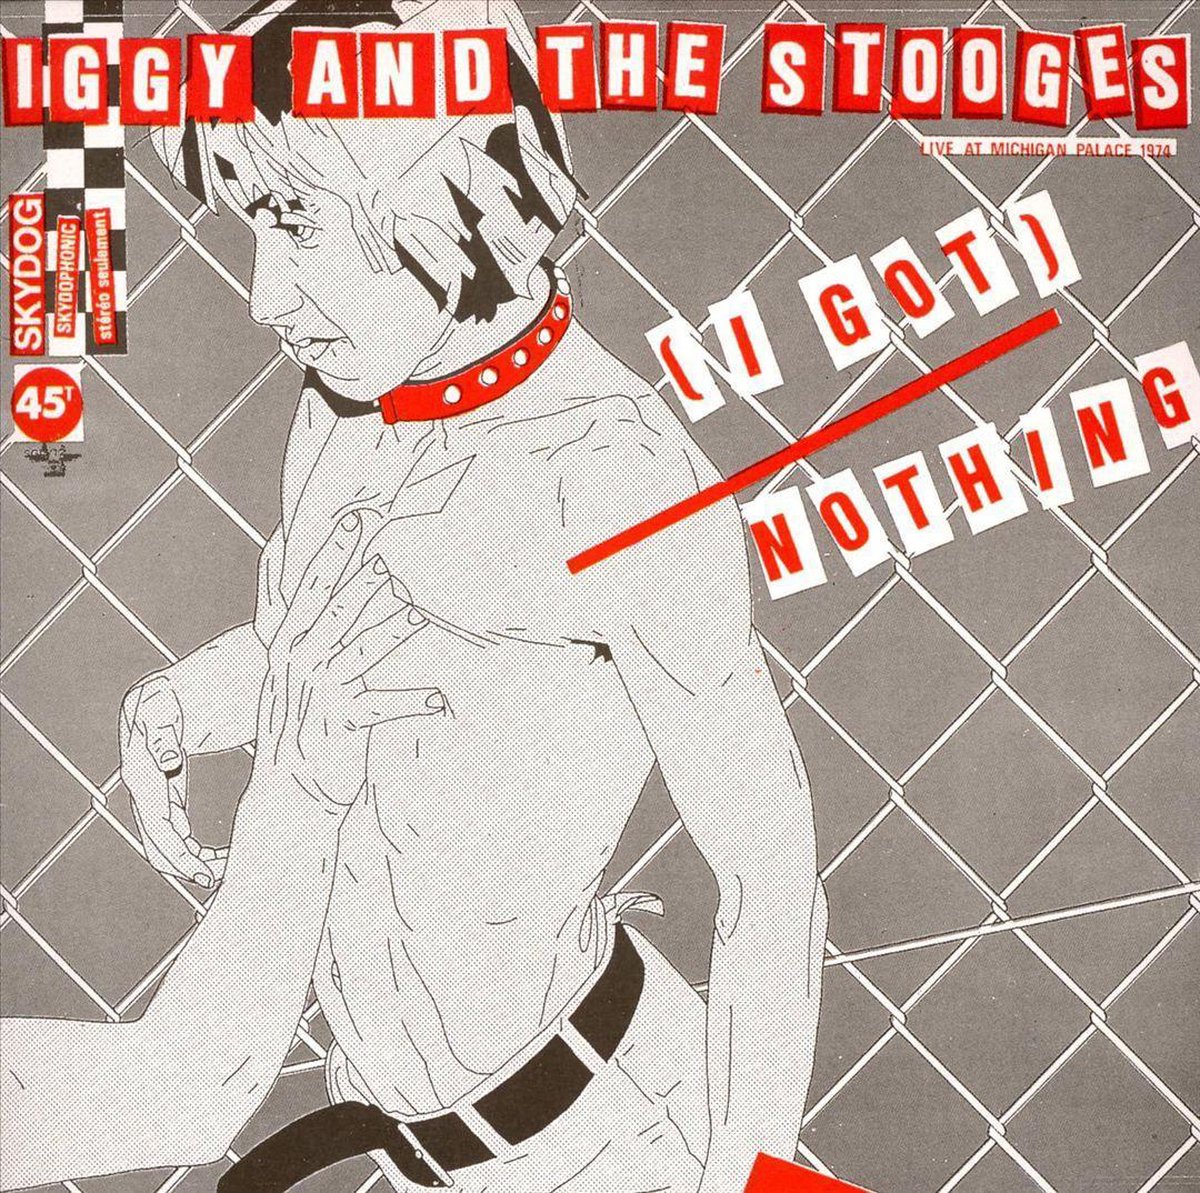 I Got Nothing/Gimmie Da Danger - Iggy And The Stooges